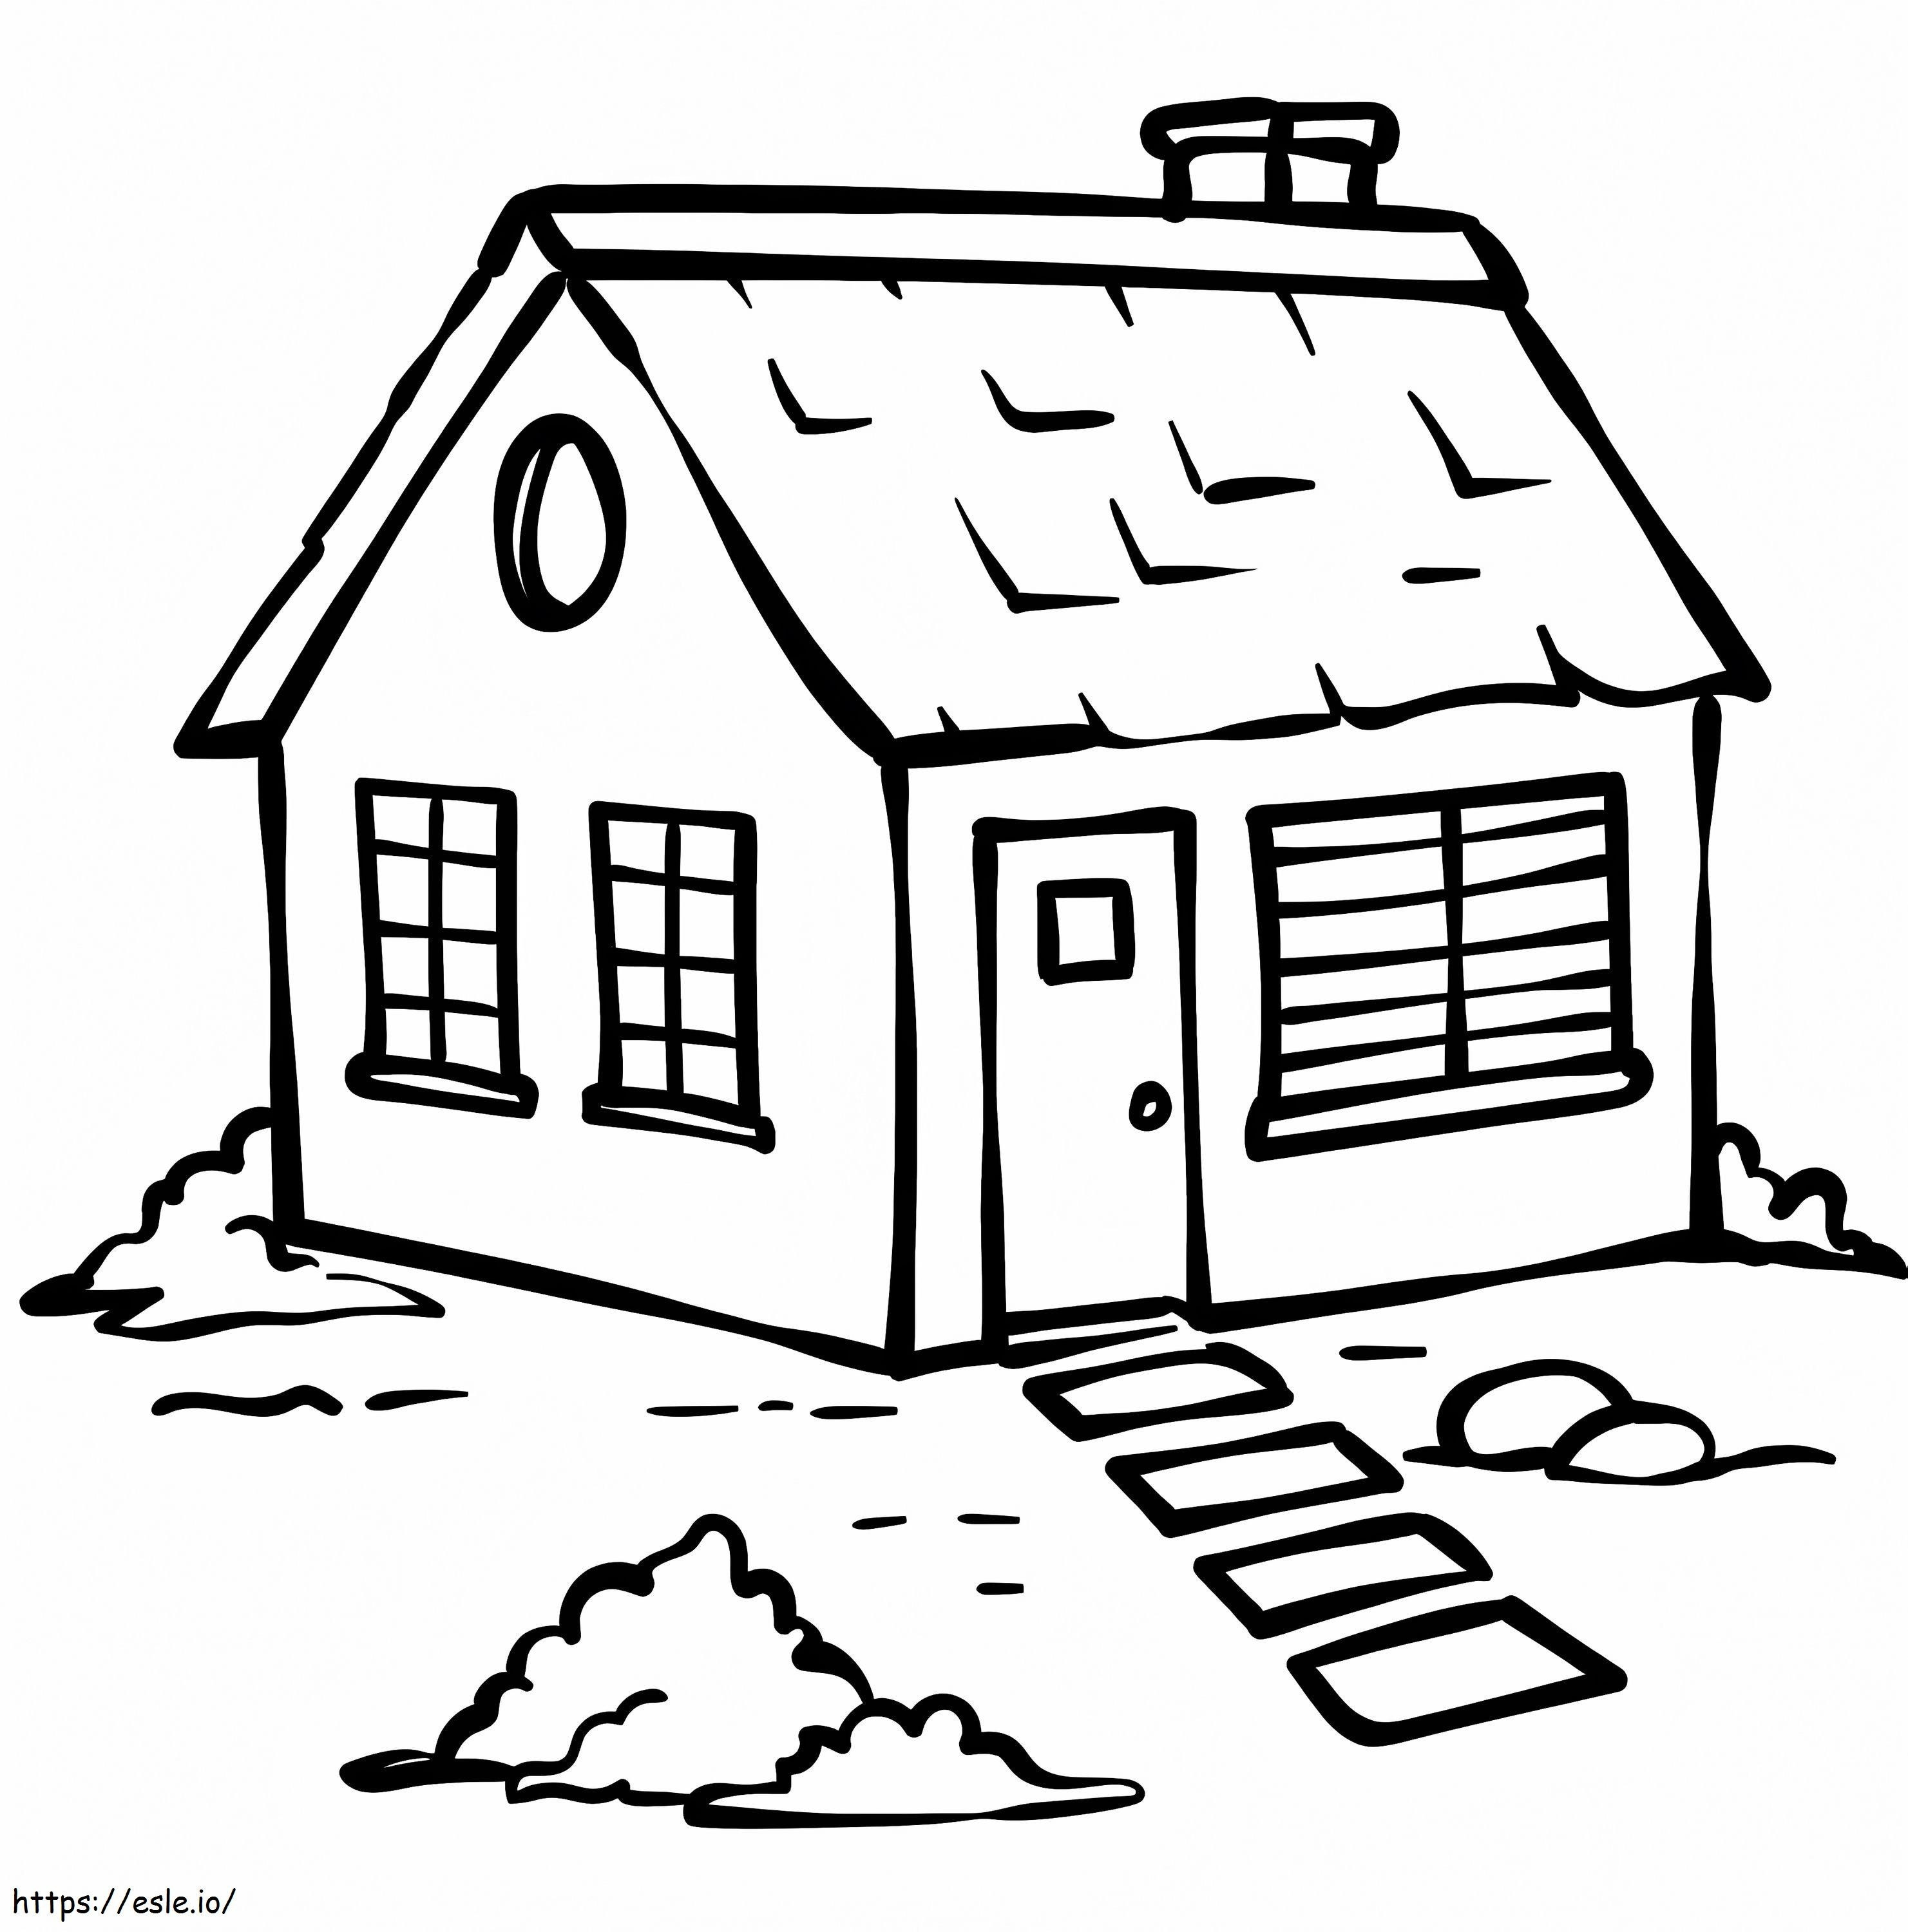 Basic House coloring page